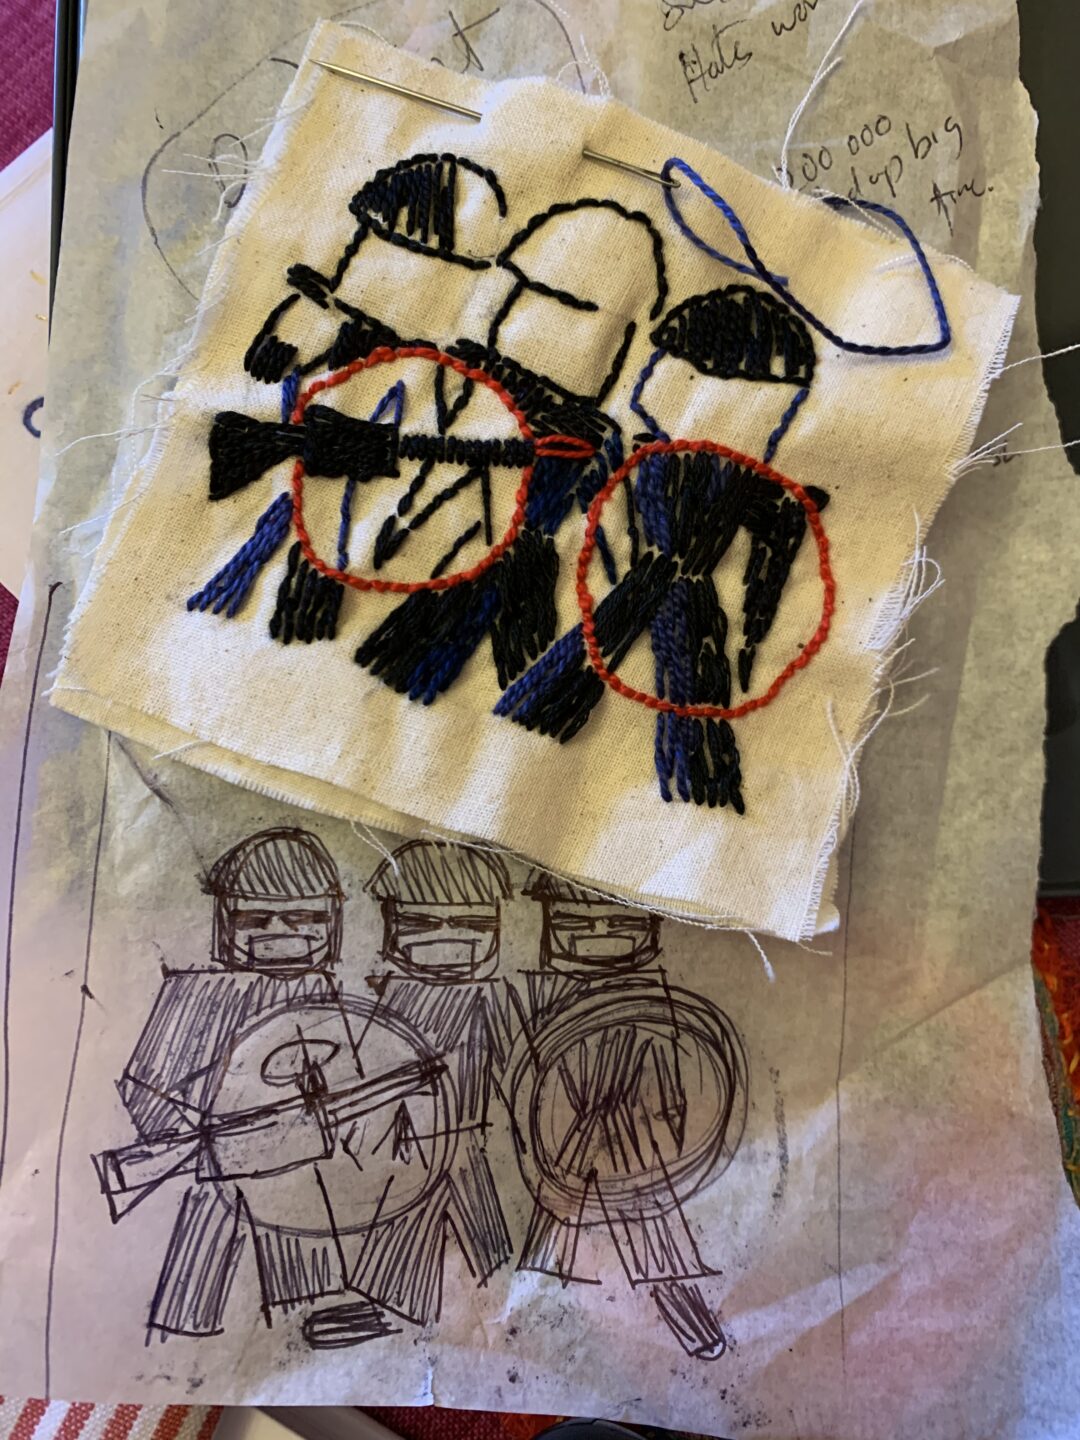 A hand stitched square and accompanying drawing o three figures probably police